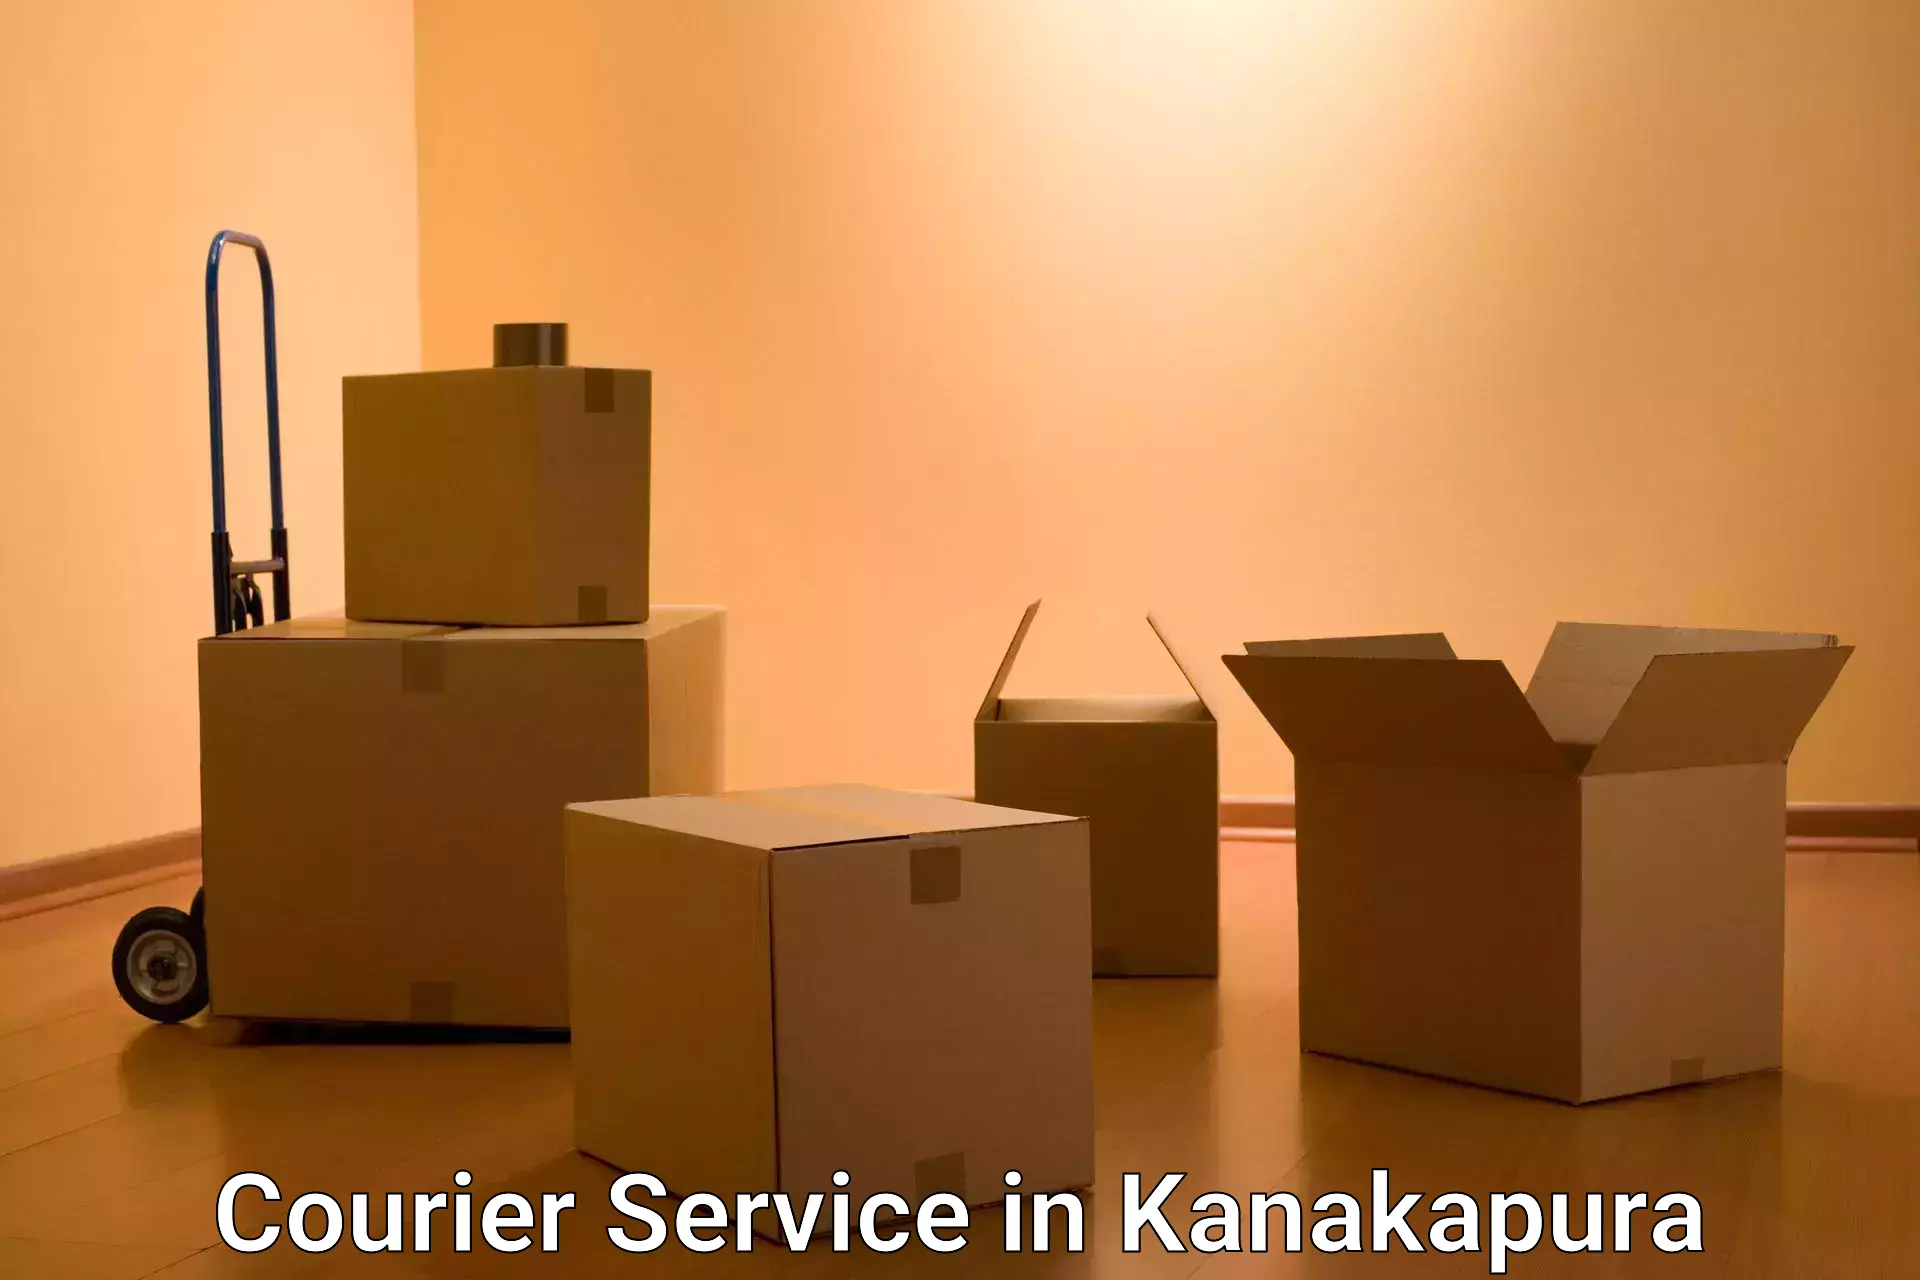 Parcel delivery automation in Kanakapura